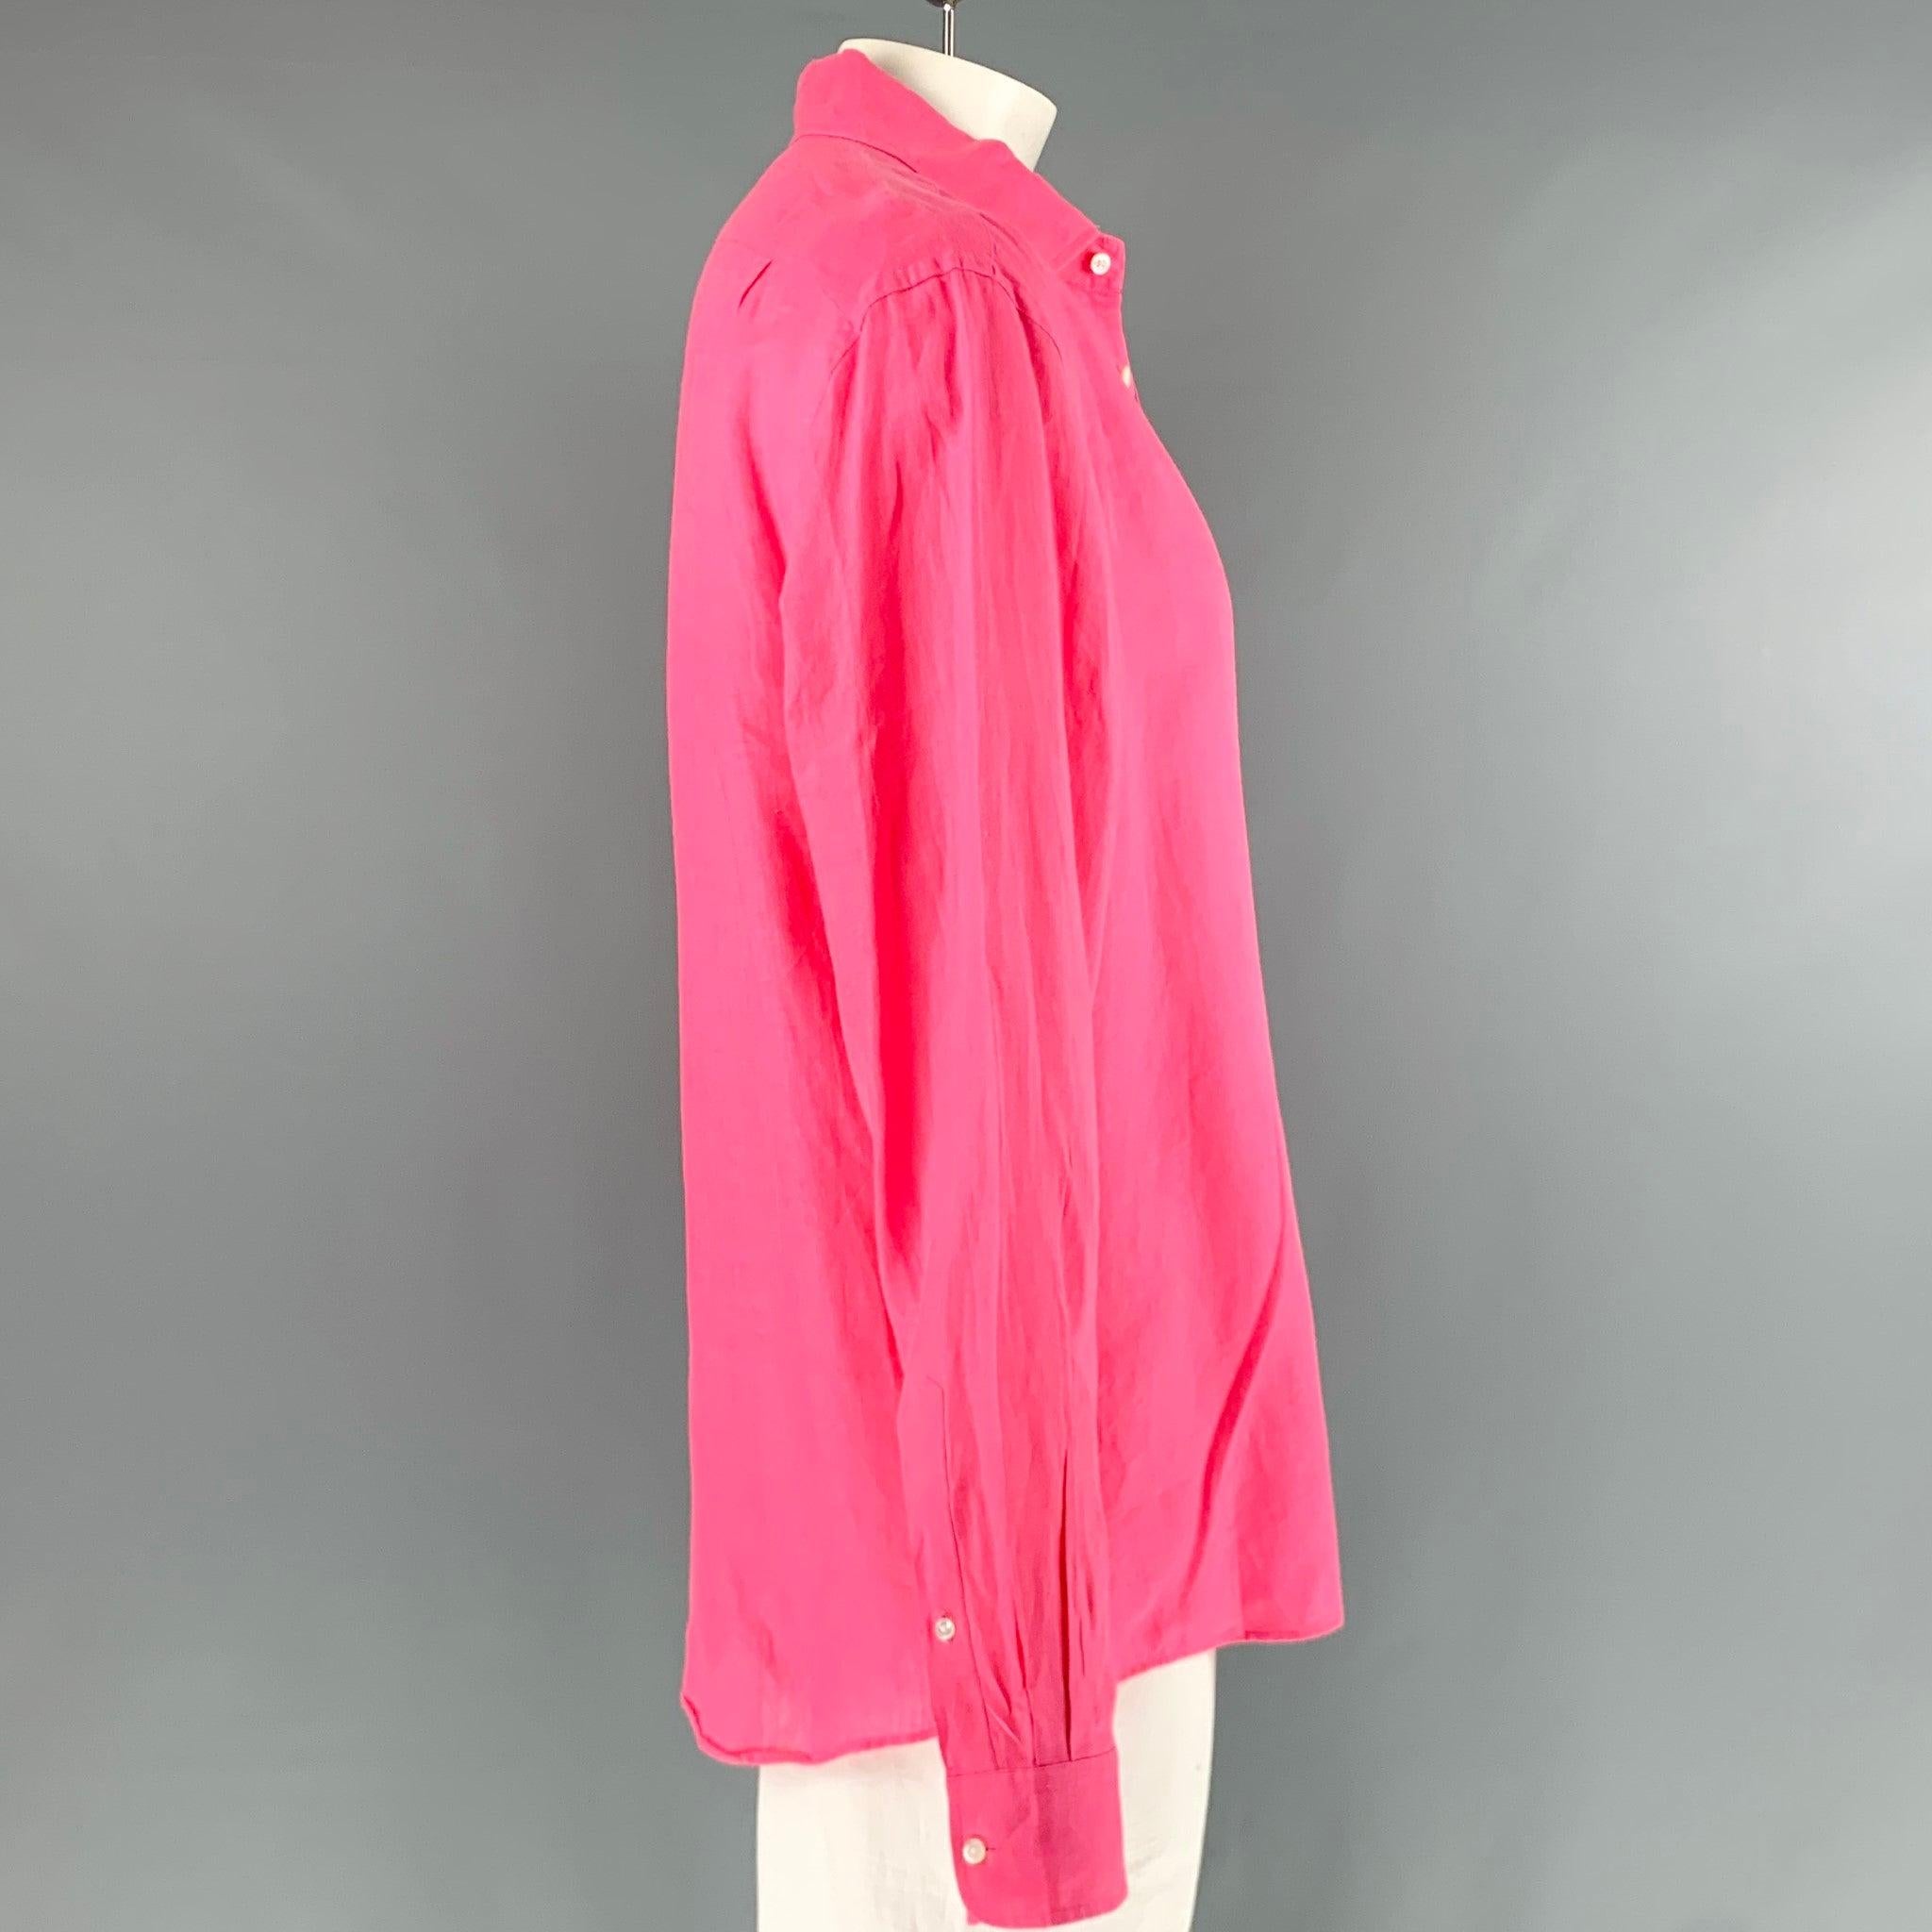 RALPH LAUREN long sleeve shirt
in
a pink linen fabric featuring spread collar and button closure. Made in Italy.Very Good Pre-Owned Condition. Minor pilling. 

Marked:   XXL 

Measurements: 
 
Shoulder: 19 inches Chest: 50 inches Sleeve: 27 inches